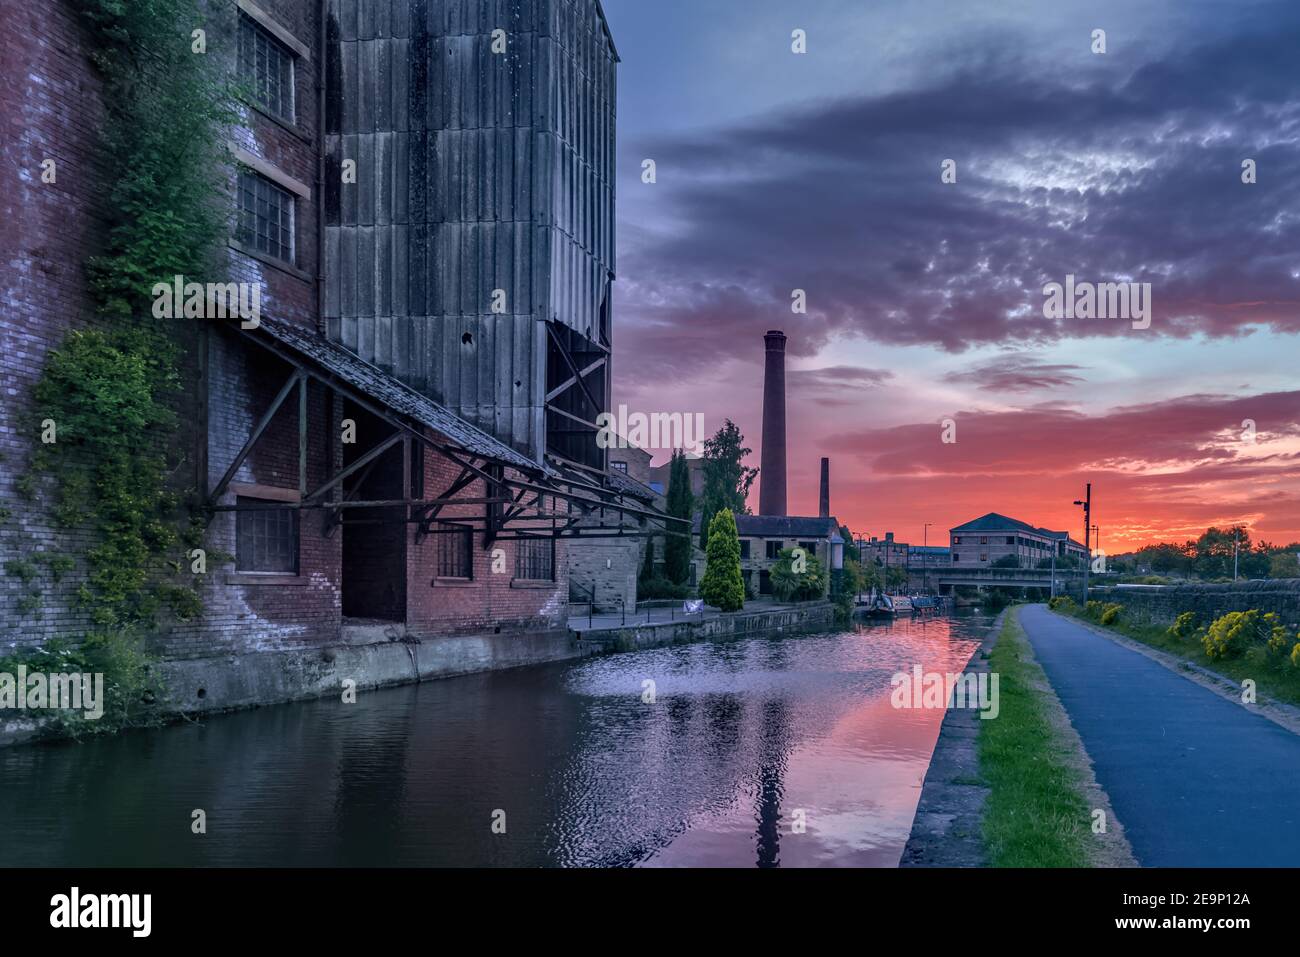 Liverpool canal leading to Shipley under a cloudy sky during the sunset in England Stock Photo